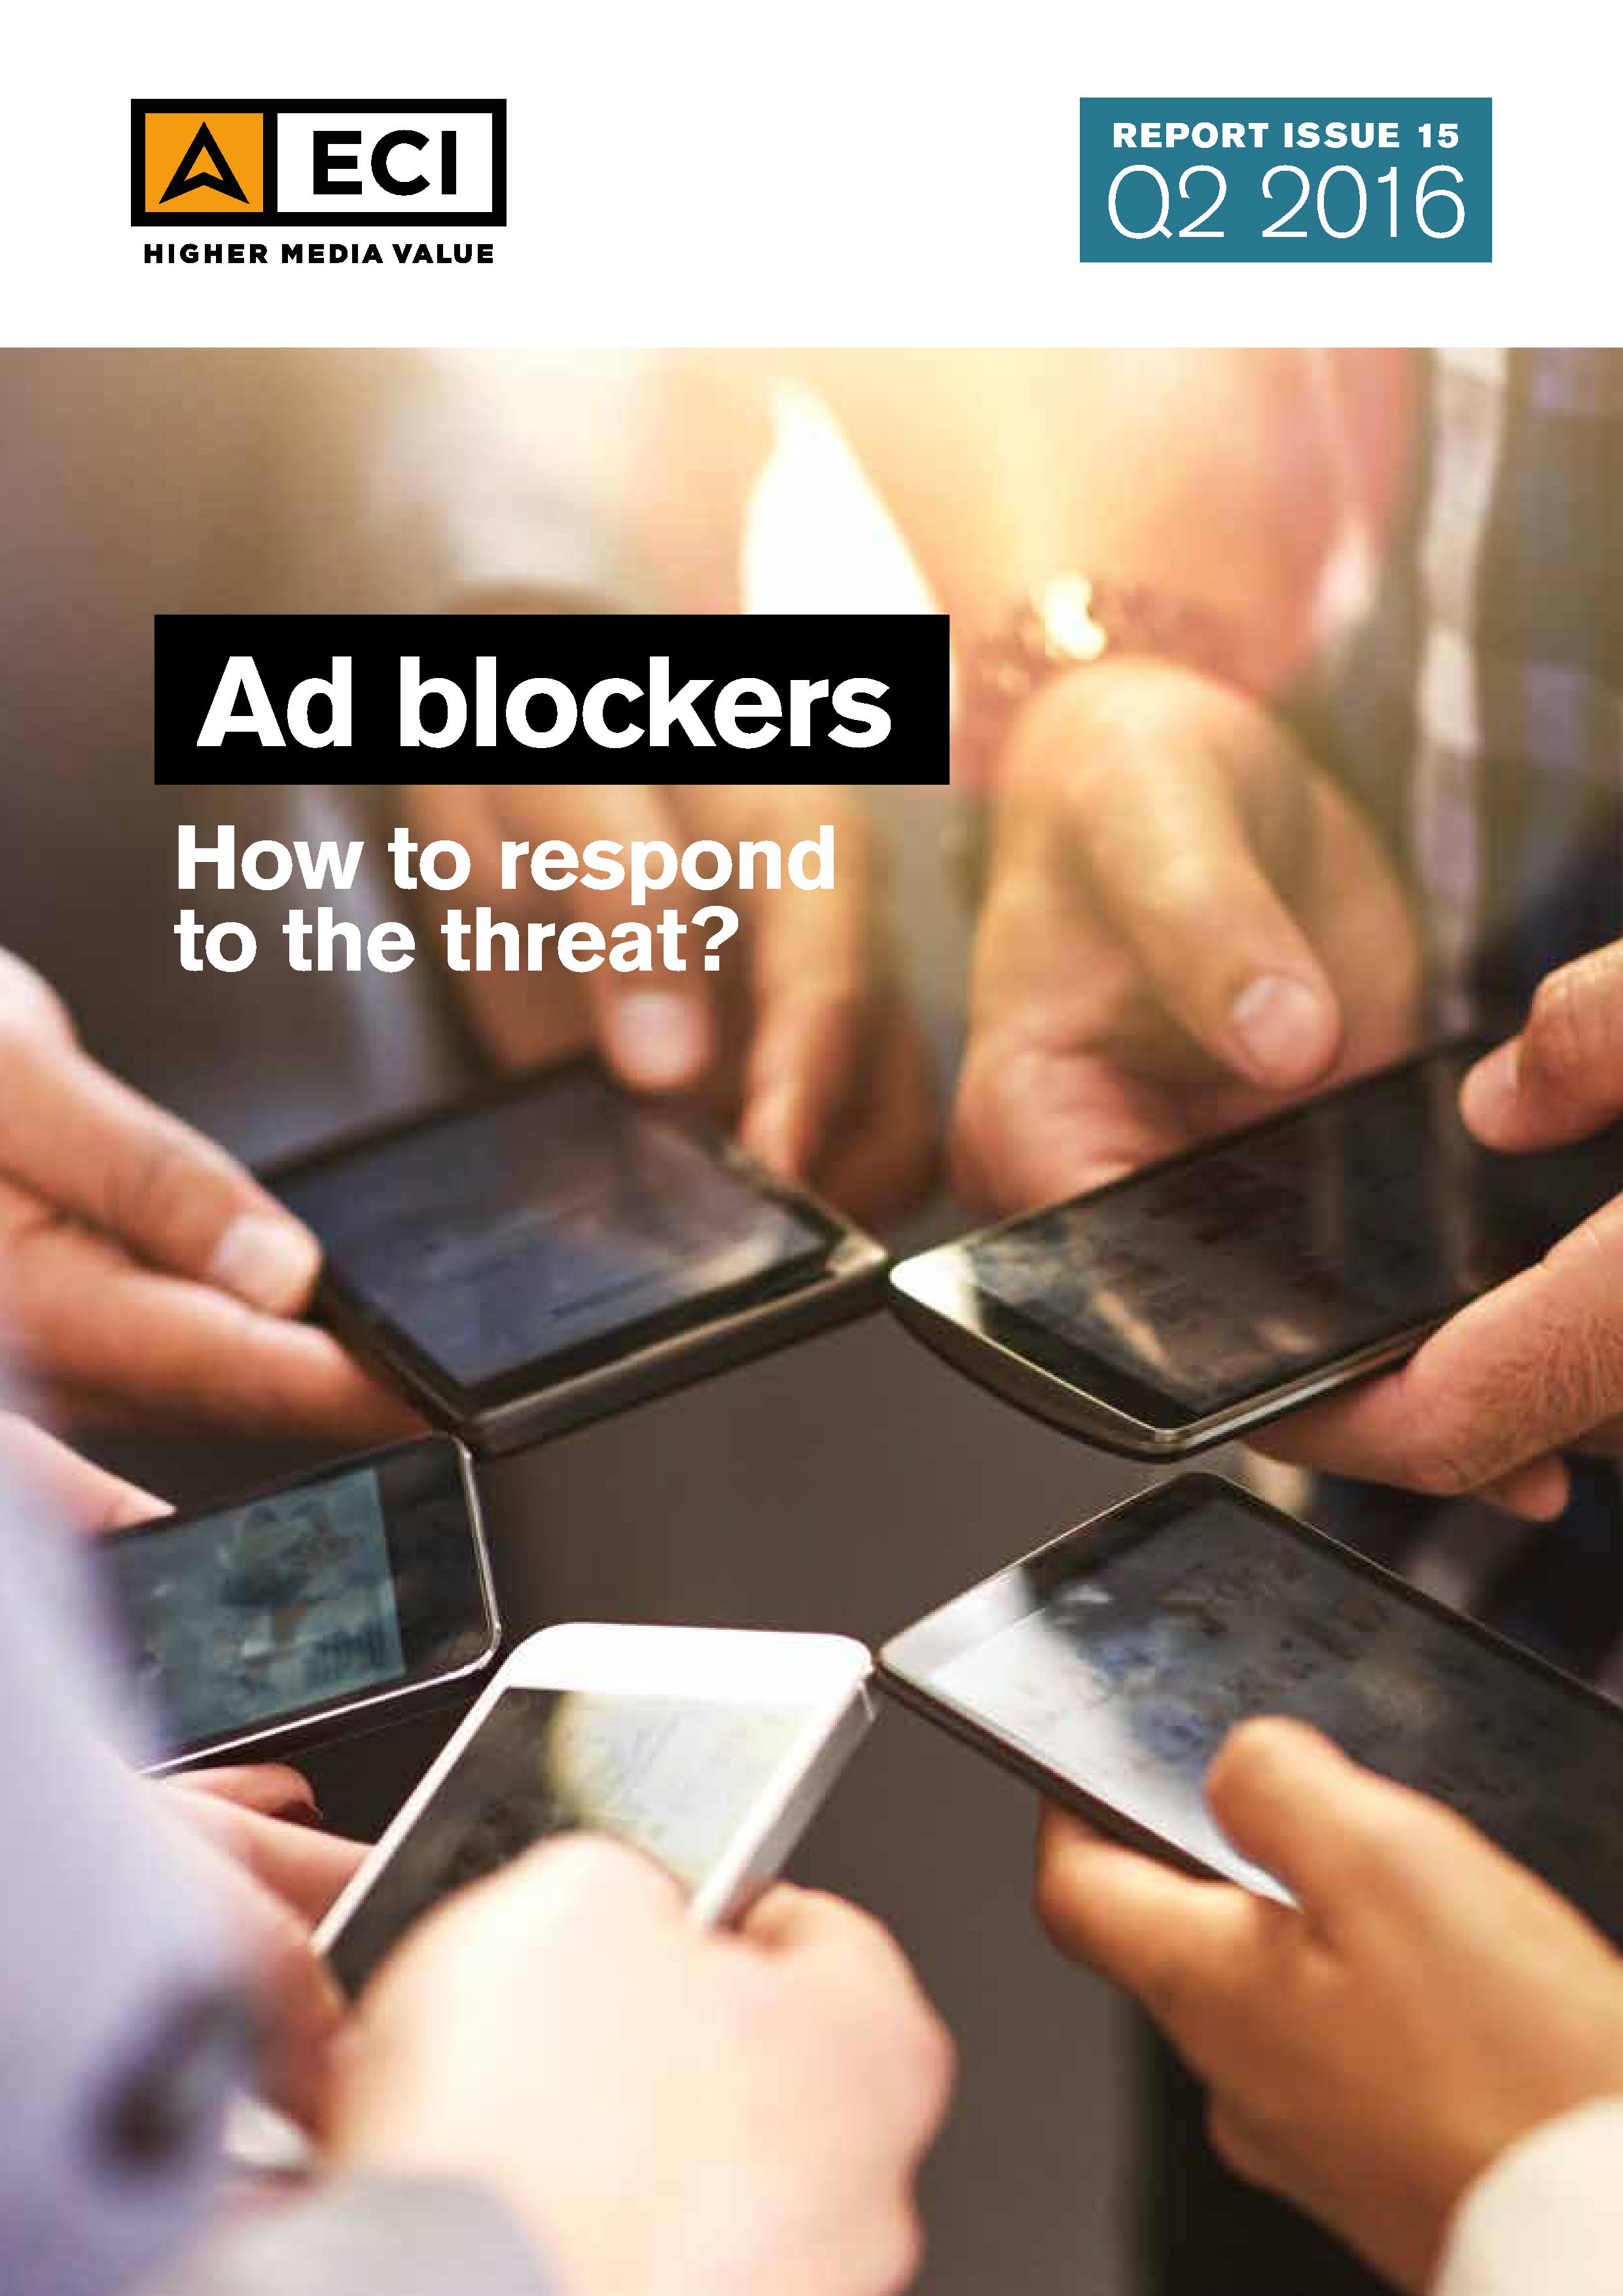 Ad blockers – How to respond to the threat?